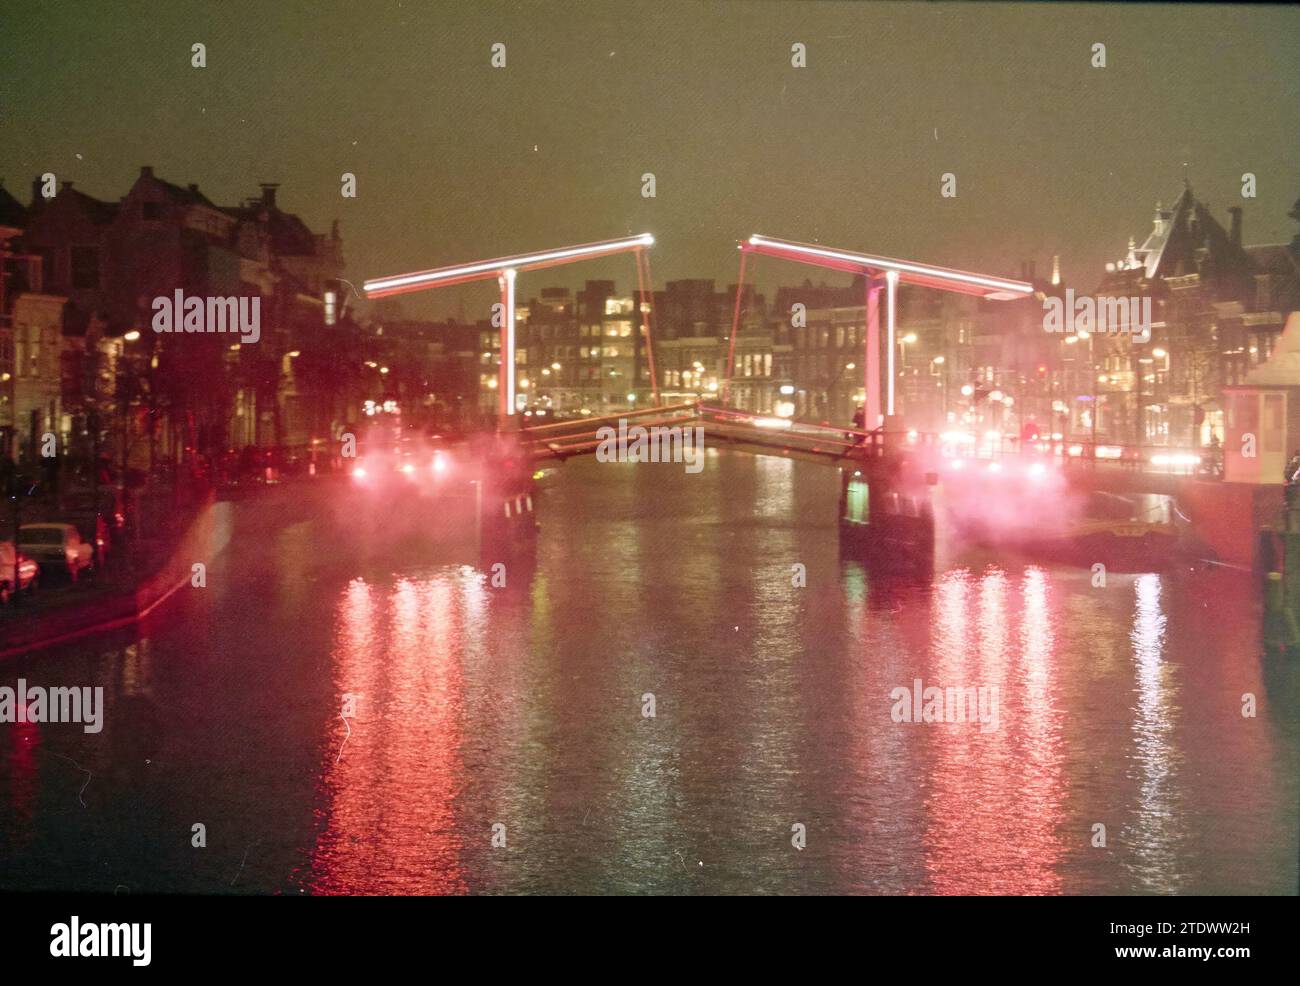 Lighting Gravesteen Bridge, H'lem, Haarlem, The Netherlands, 17-12-1998, Whizgle News from the Past, Tailored for the Future. Explore historical narratives, Dutch The Netherlands agency image with a modern perspective, bridging the gap between yesterday's events and tomorrow's insights. A timeless journey shaping the stories that shape our future Stock Photo